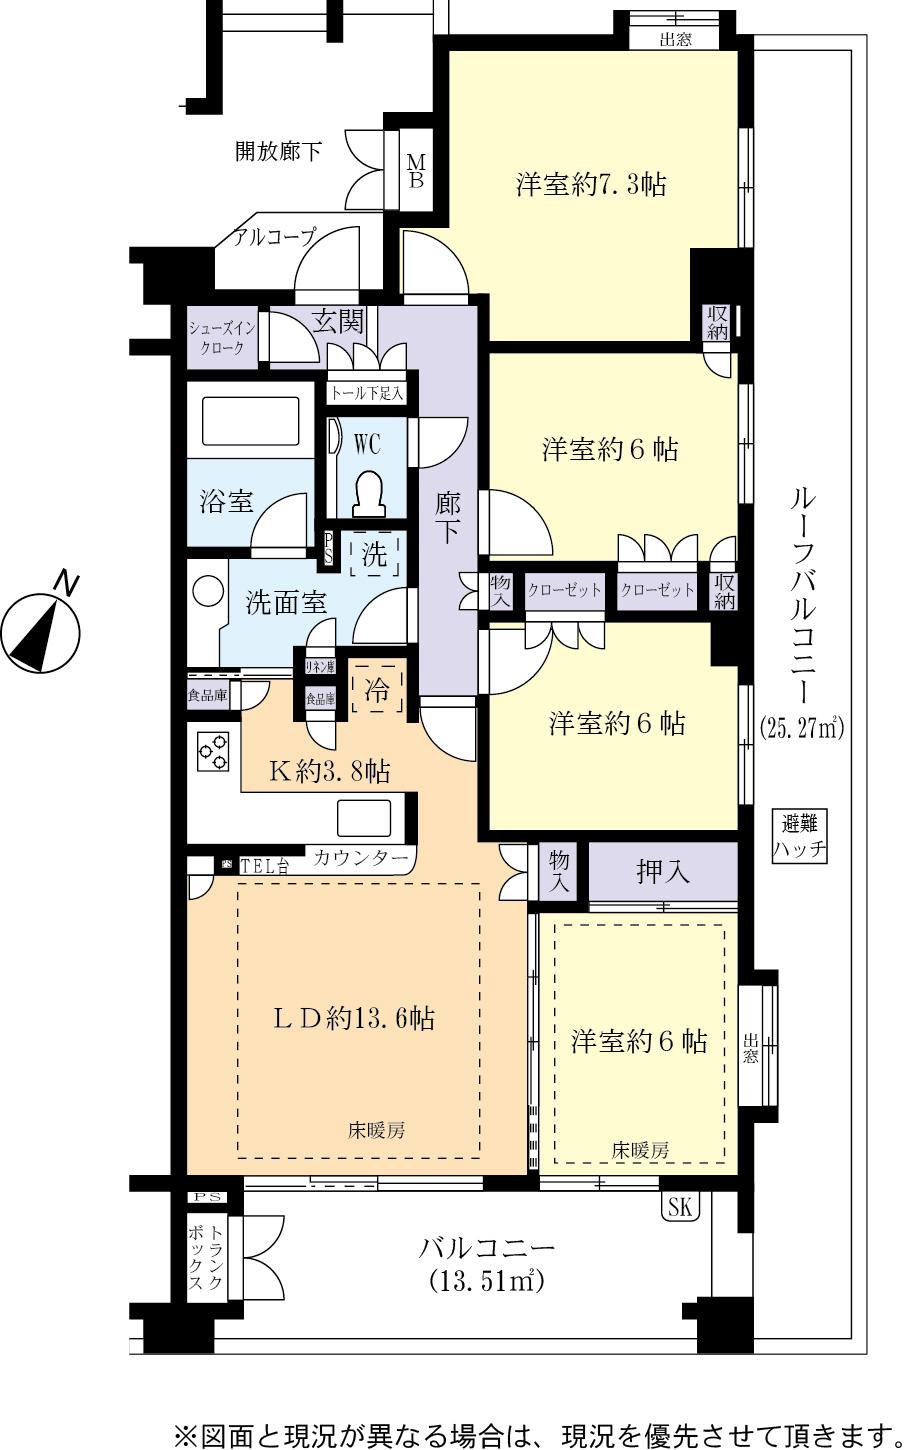 Floor plan. 4LDK, Price 37,800,000 yen, Footprint 98.2 sq m , Balcony area 13.51 sq m wide south-facing angle room on the top floor with a roof balcony! !